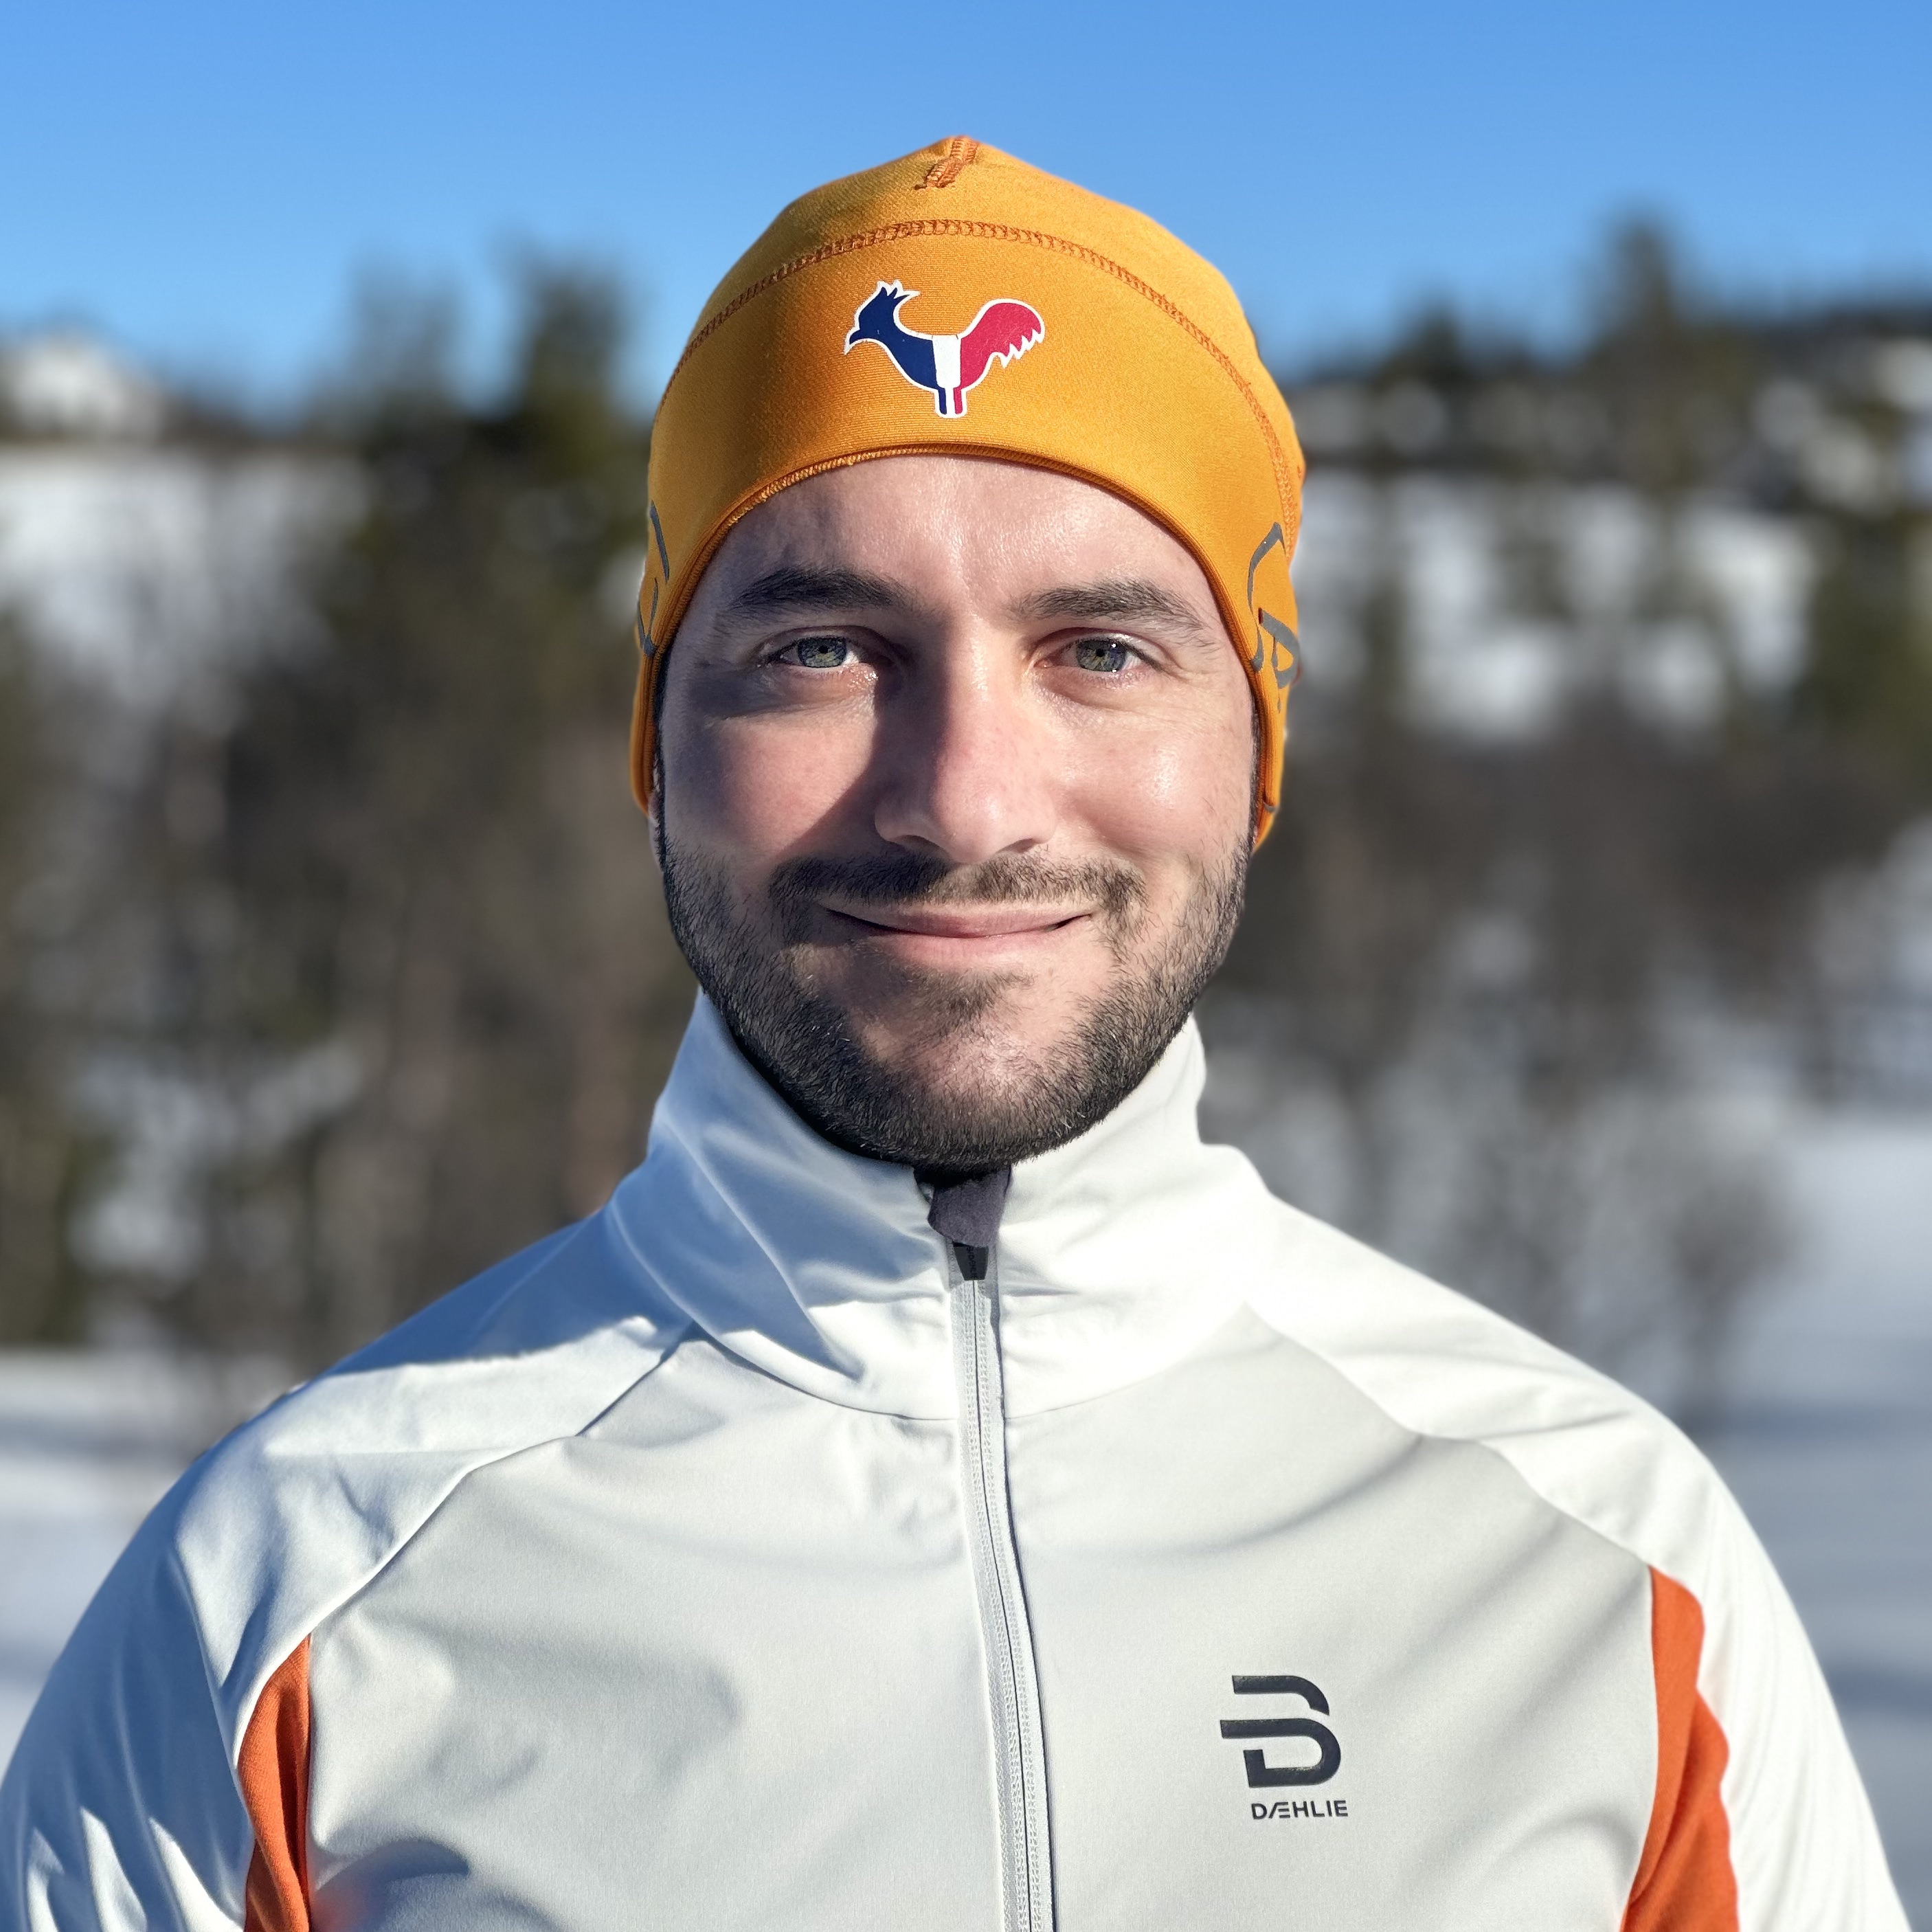 Picture of Thomas Bassetto, in a cross-country ski outfit